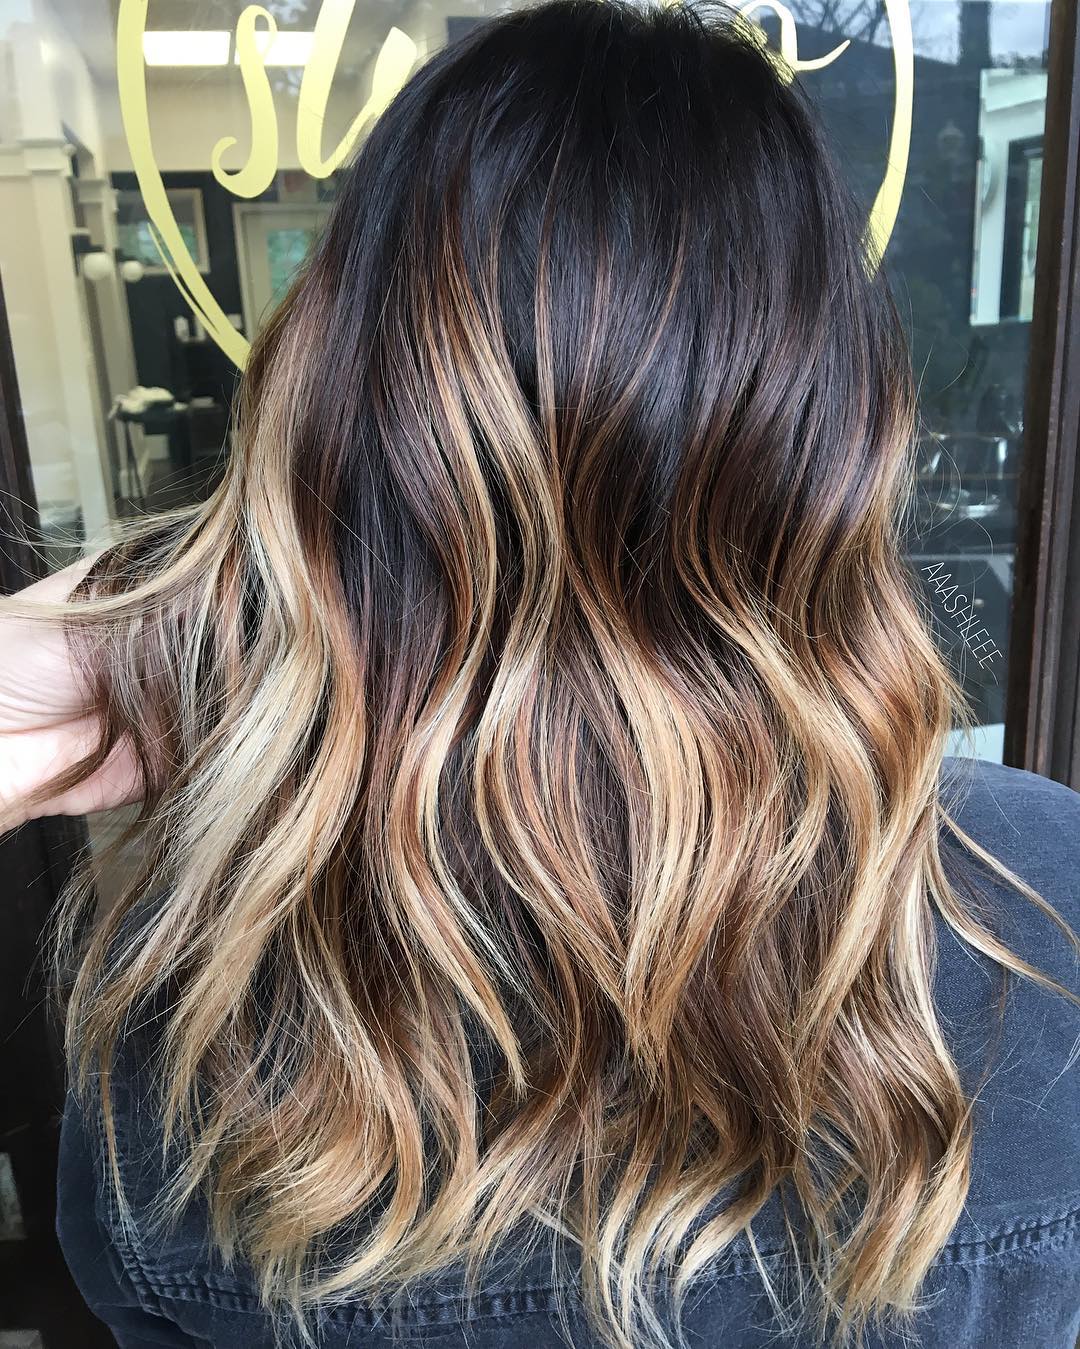 20 On-Trend Brown to Blonde Balayage Looks That Will Make You Jealous